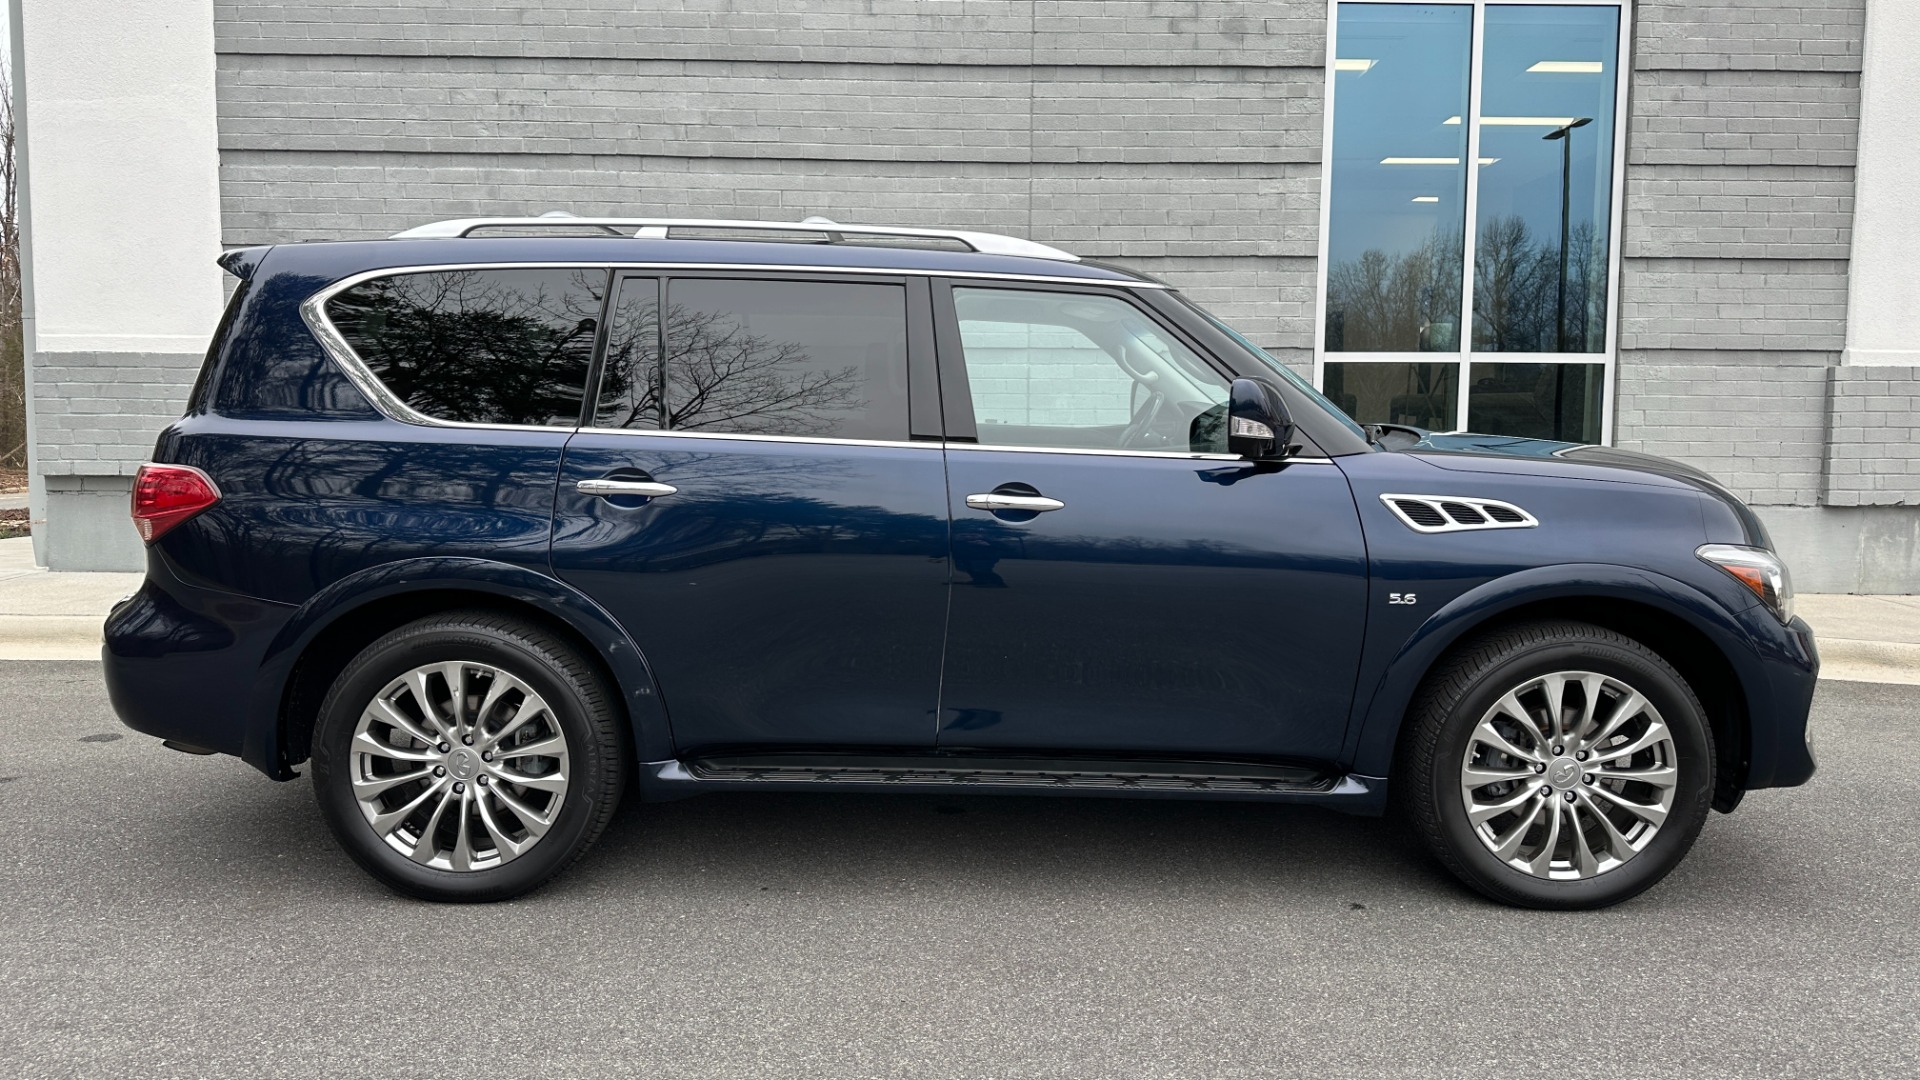 Used 2016 INFINITI QX80 LIMITED / 22IN WHEELS / THEATER PACKAGE / DRIVER ASSISTANCE / V8 / 4WD for sale $33,995 at Formula Imports in Charlotte NC 28227 6